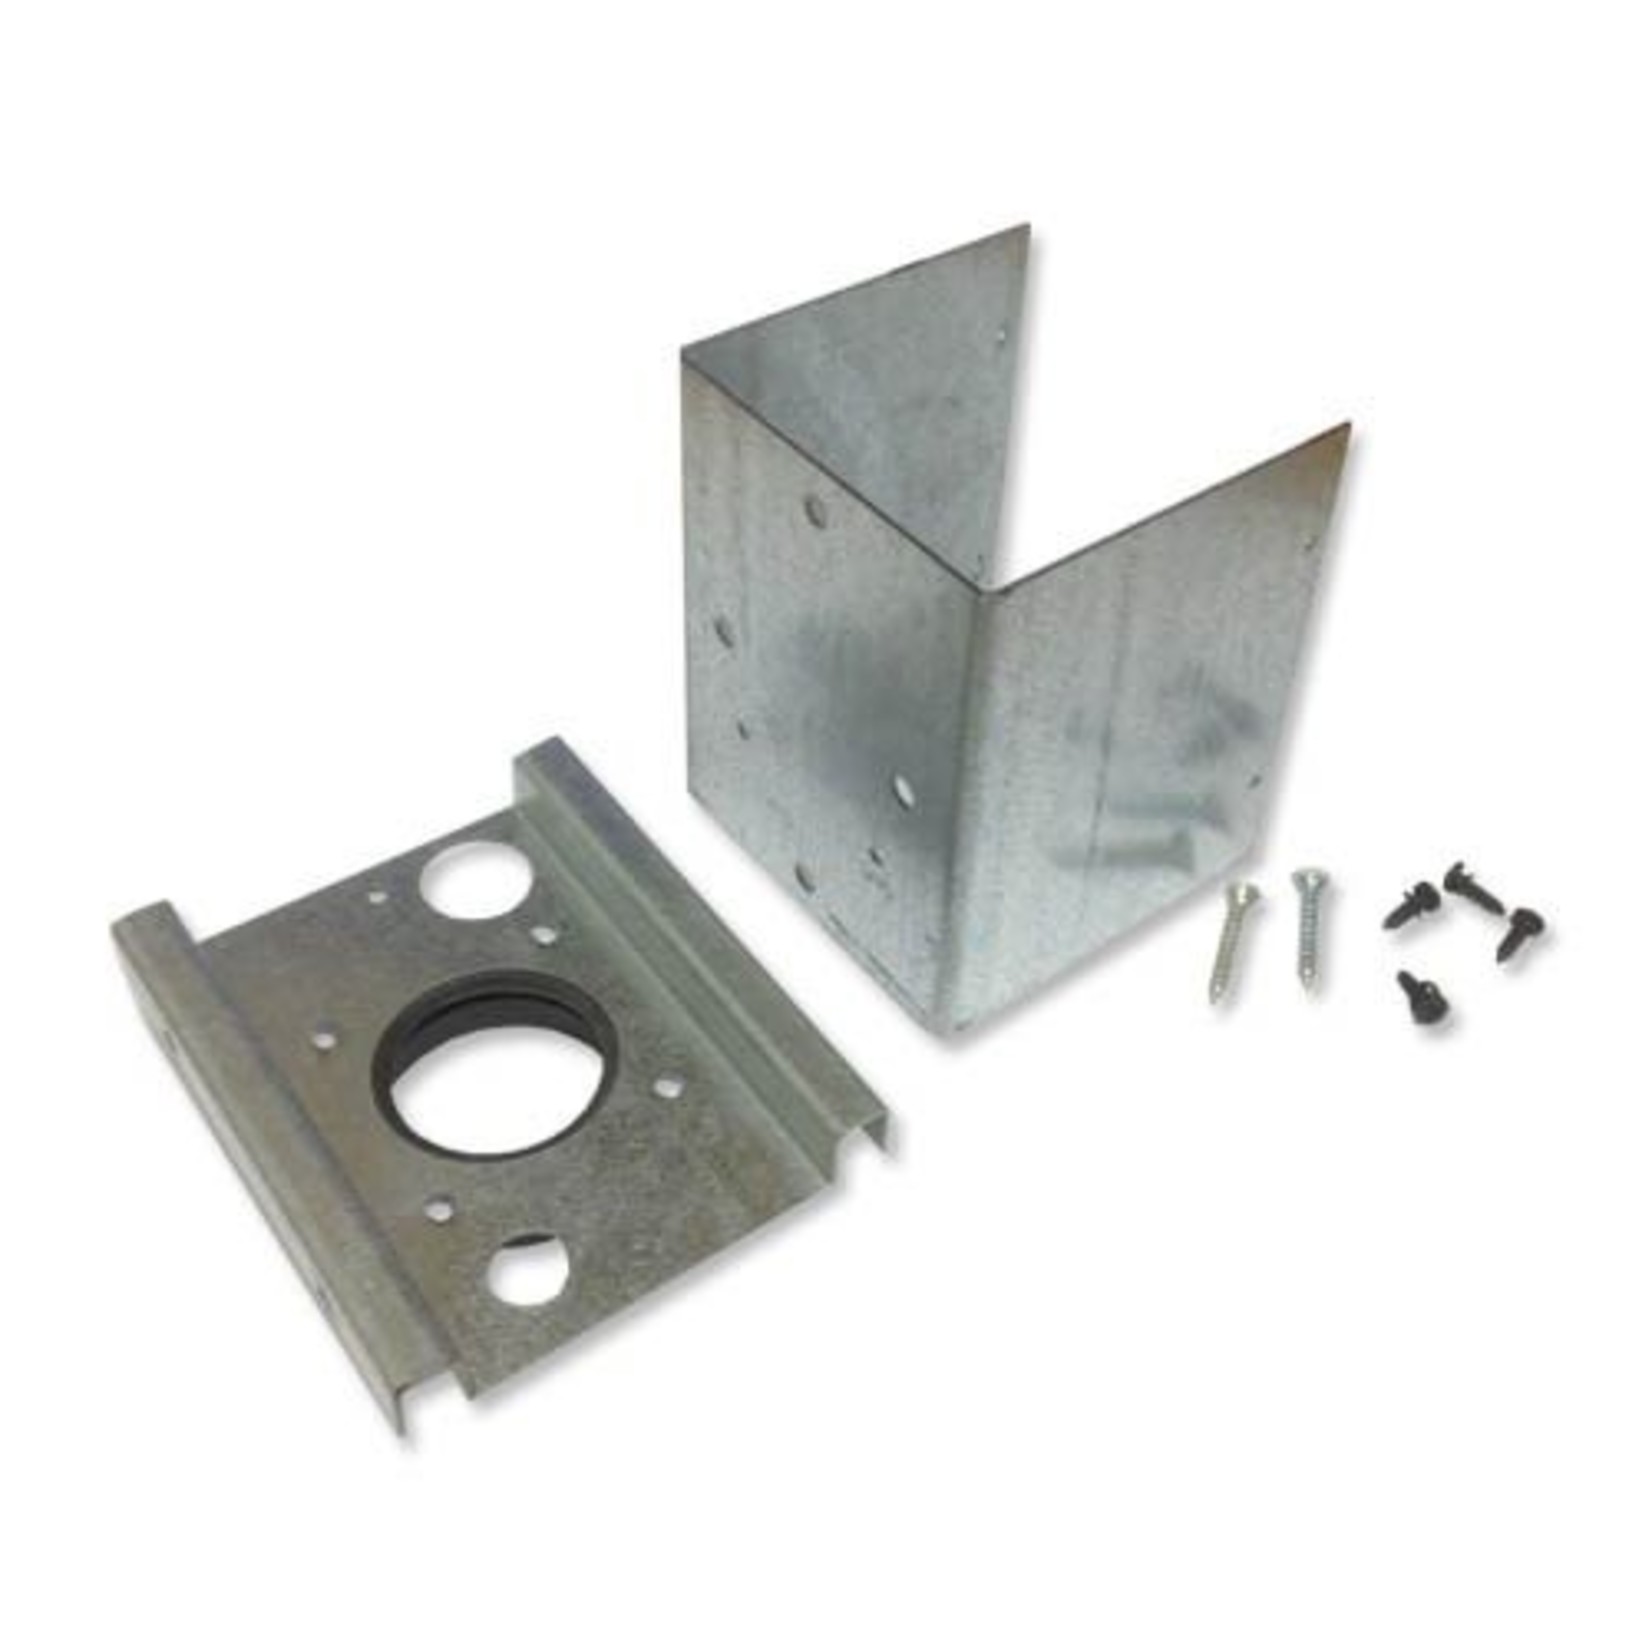 Swiss Boy Central Vacuum Steel Surface Mount Box for Low Voltage Valve